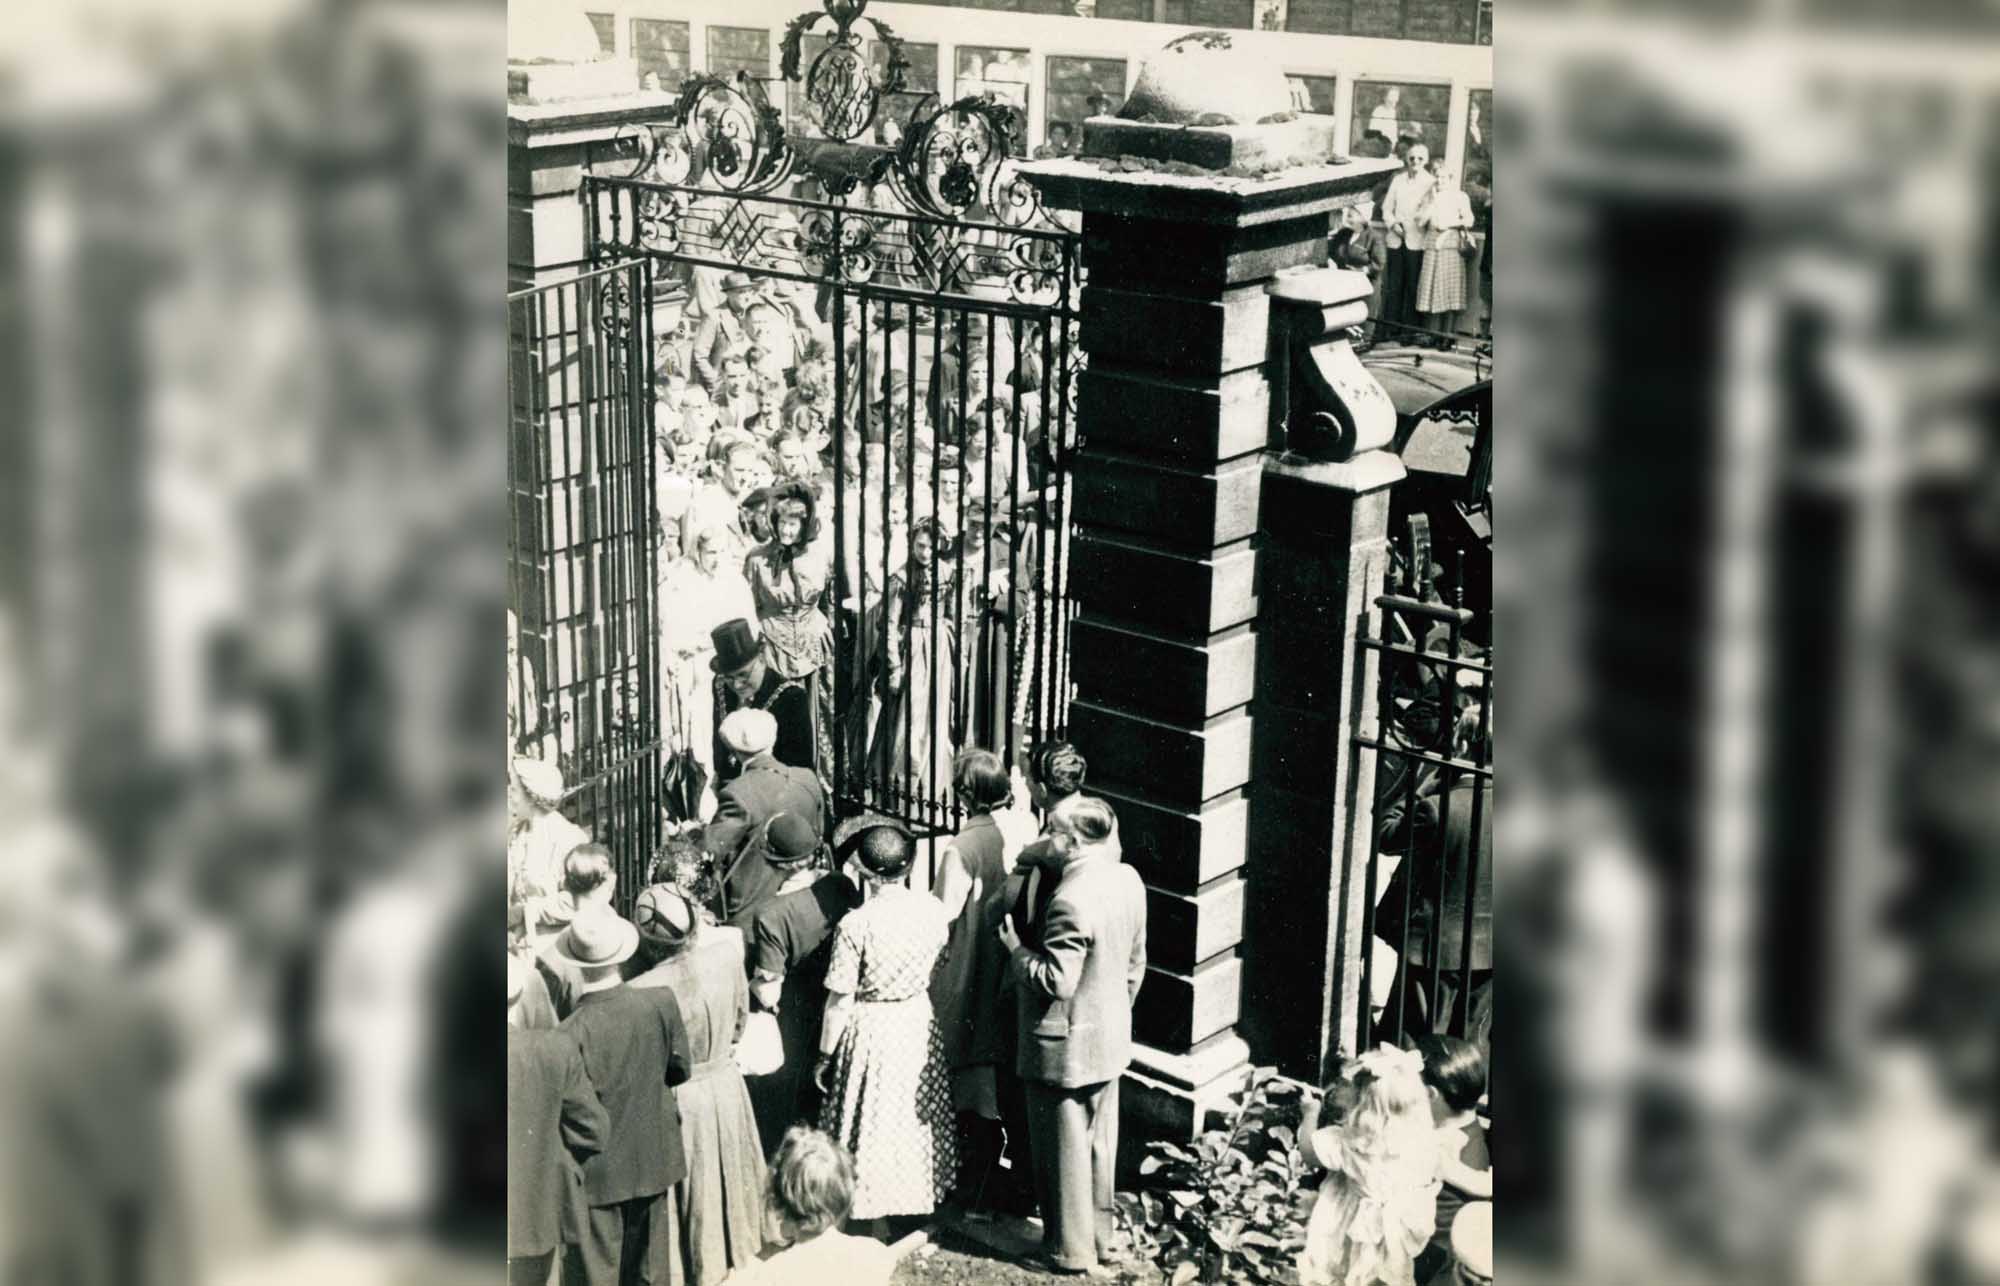 Crowds gather by the front gates of Newarke House, 1953. Leicestershire Record Office.